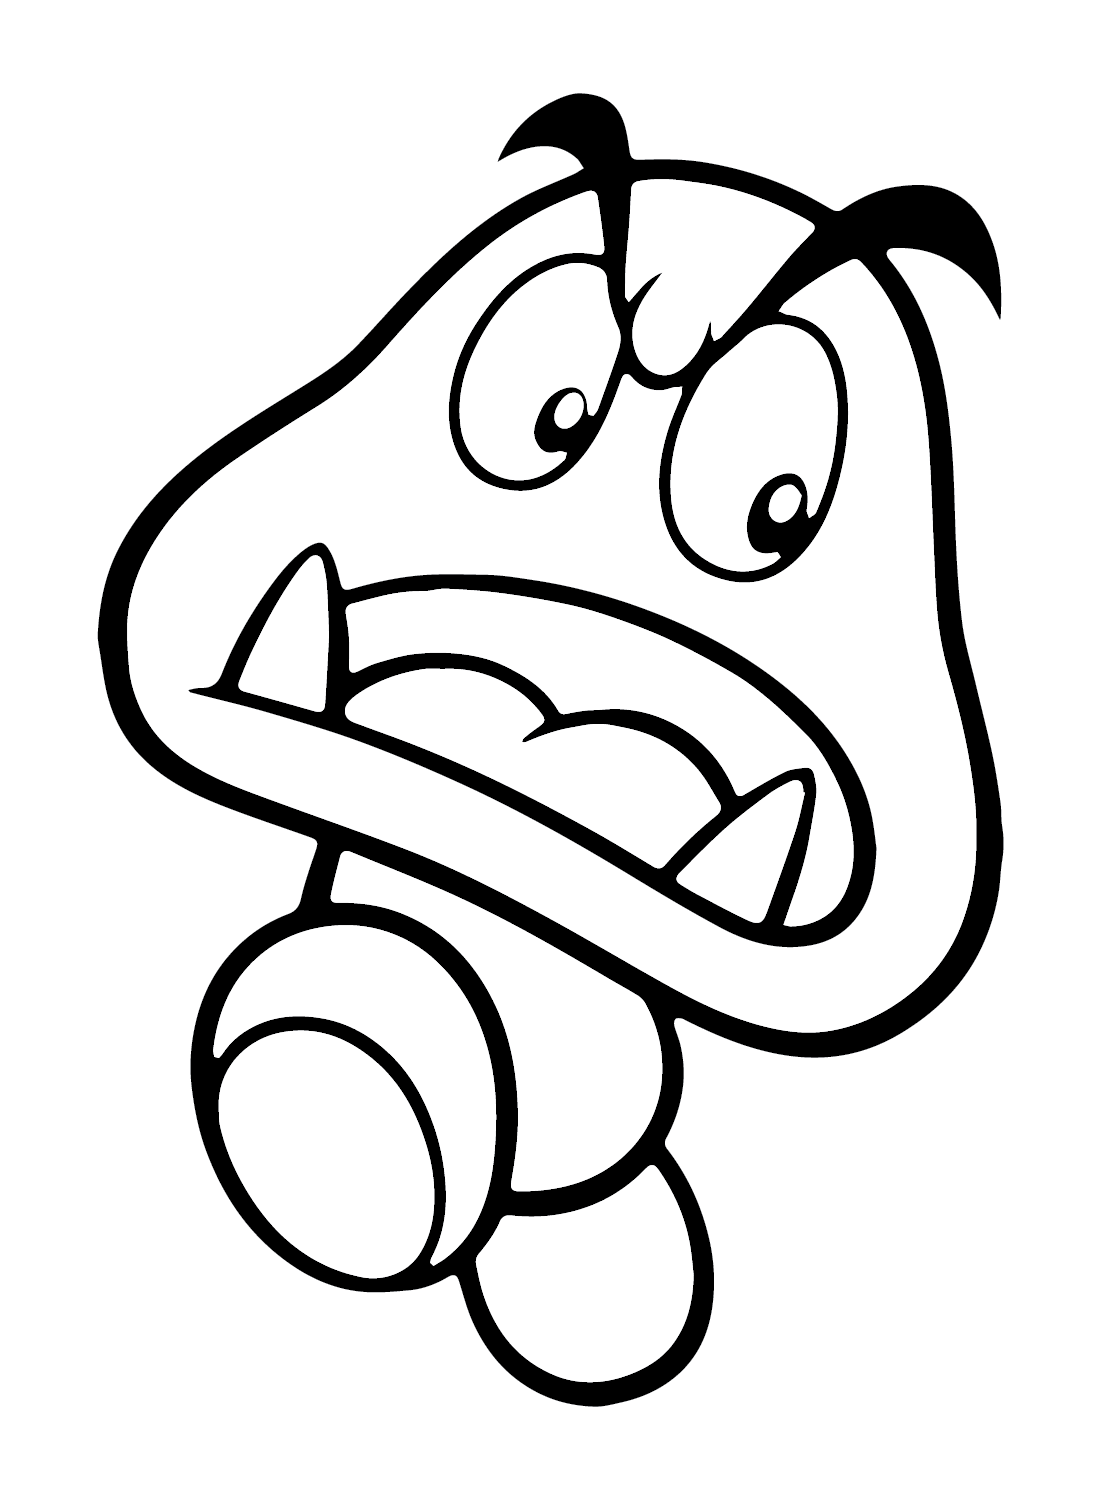 Free Goomba Coloring Page - Free Printable Coloring Pages